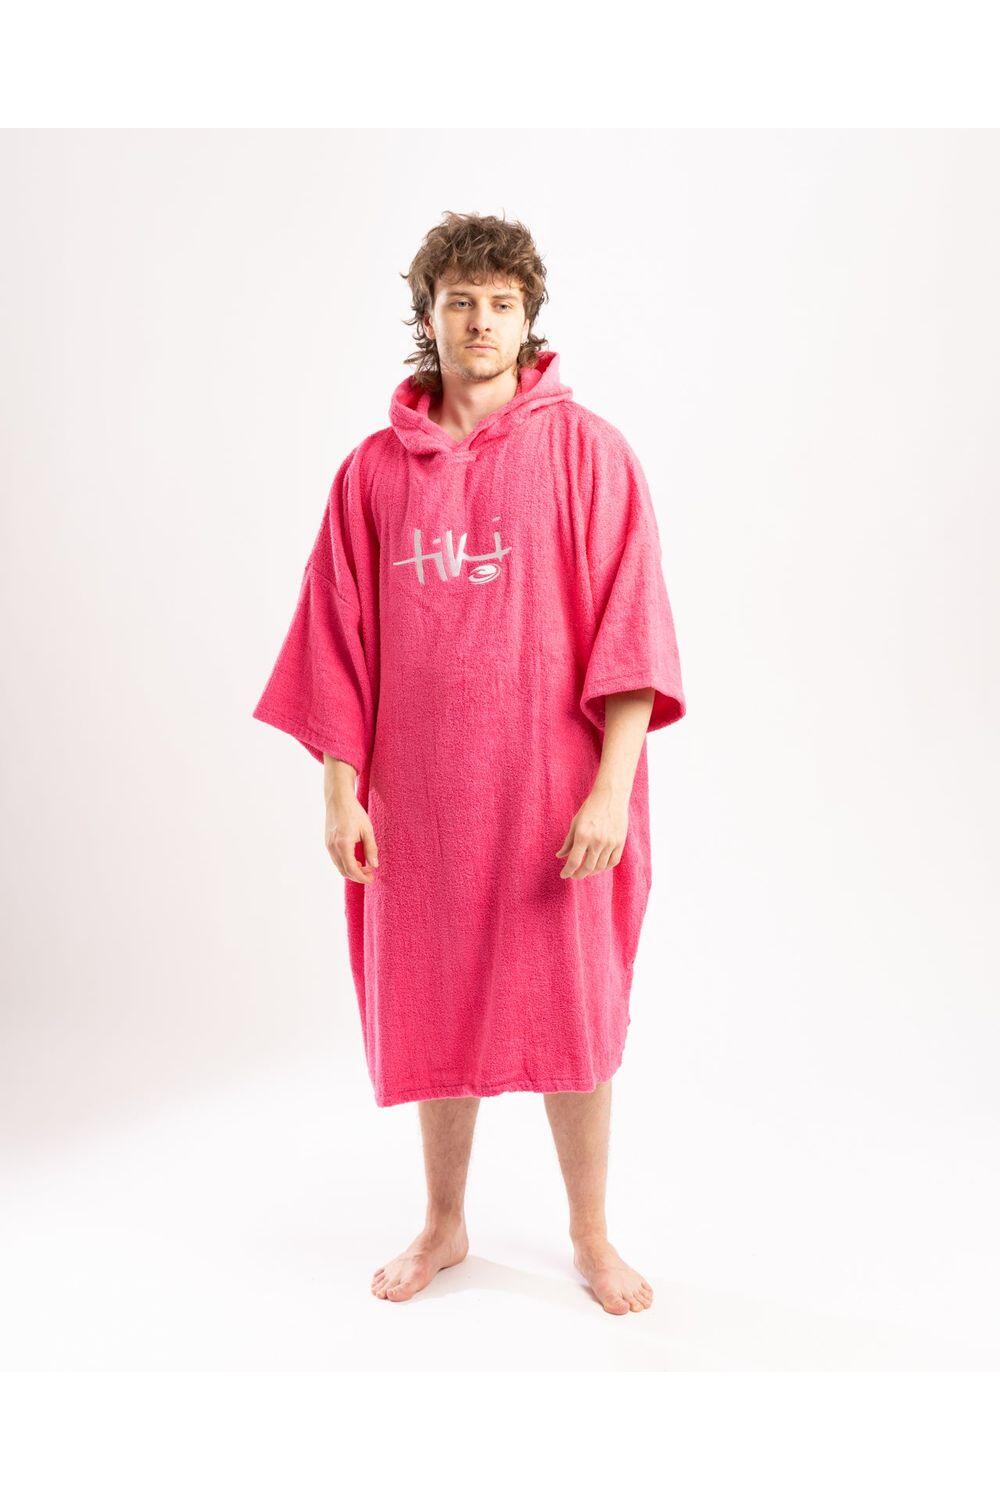 Adults Hooded Change Robe - Pink 5/7